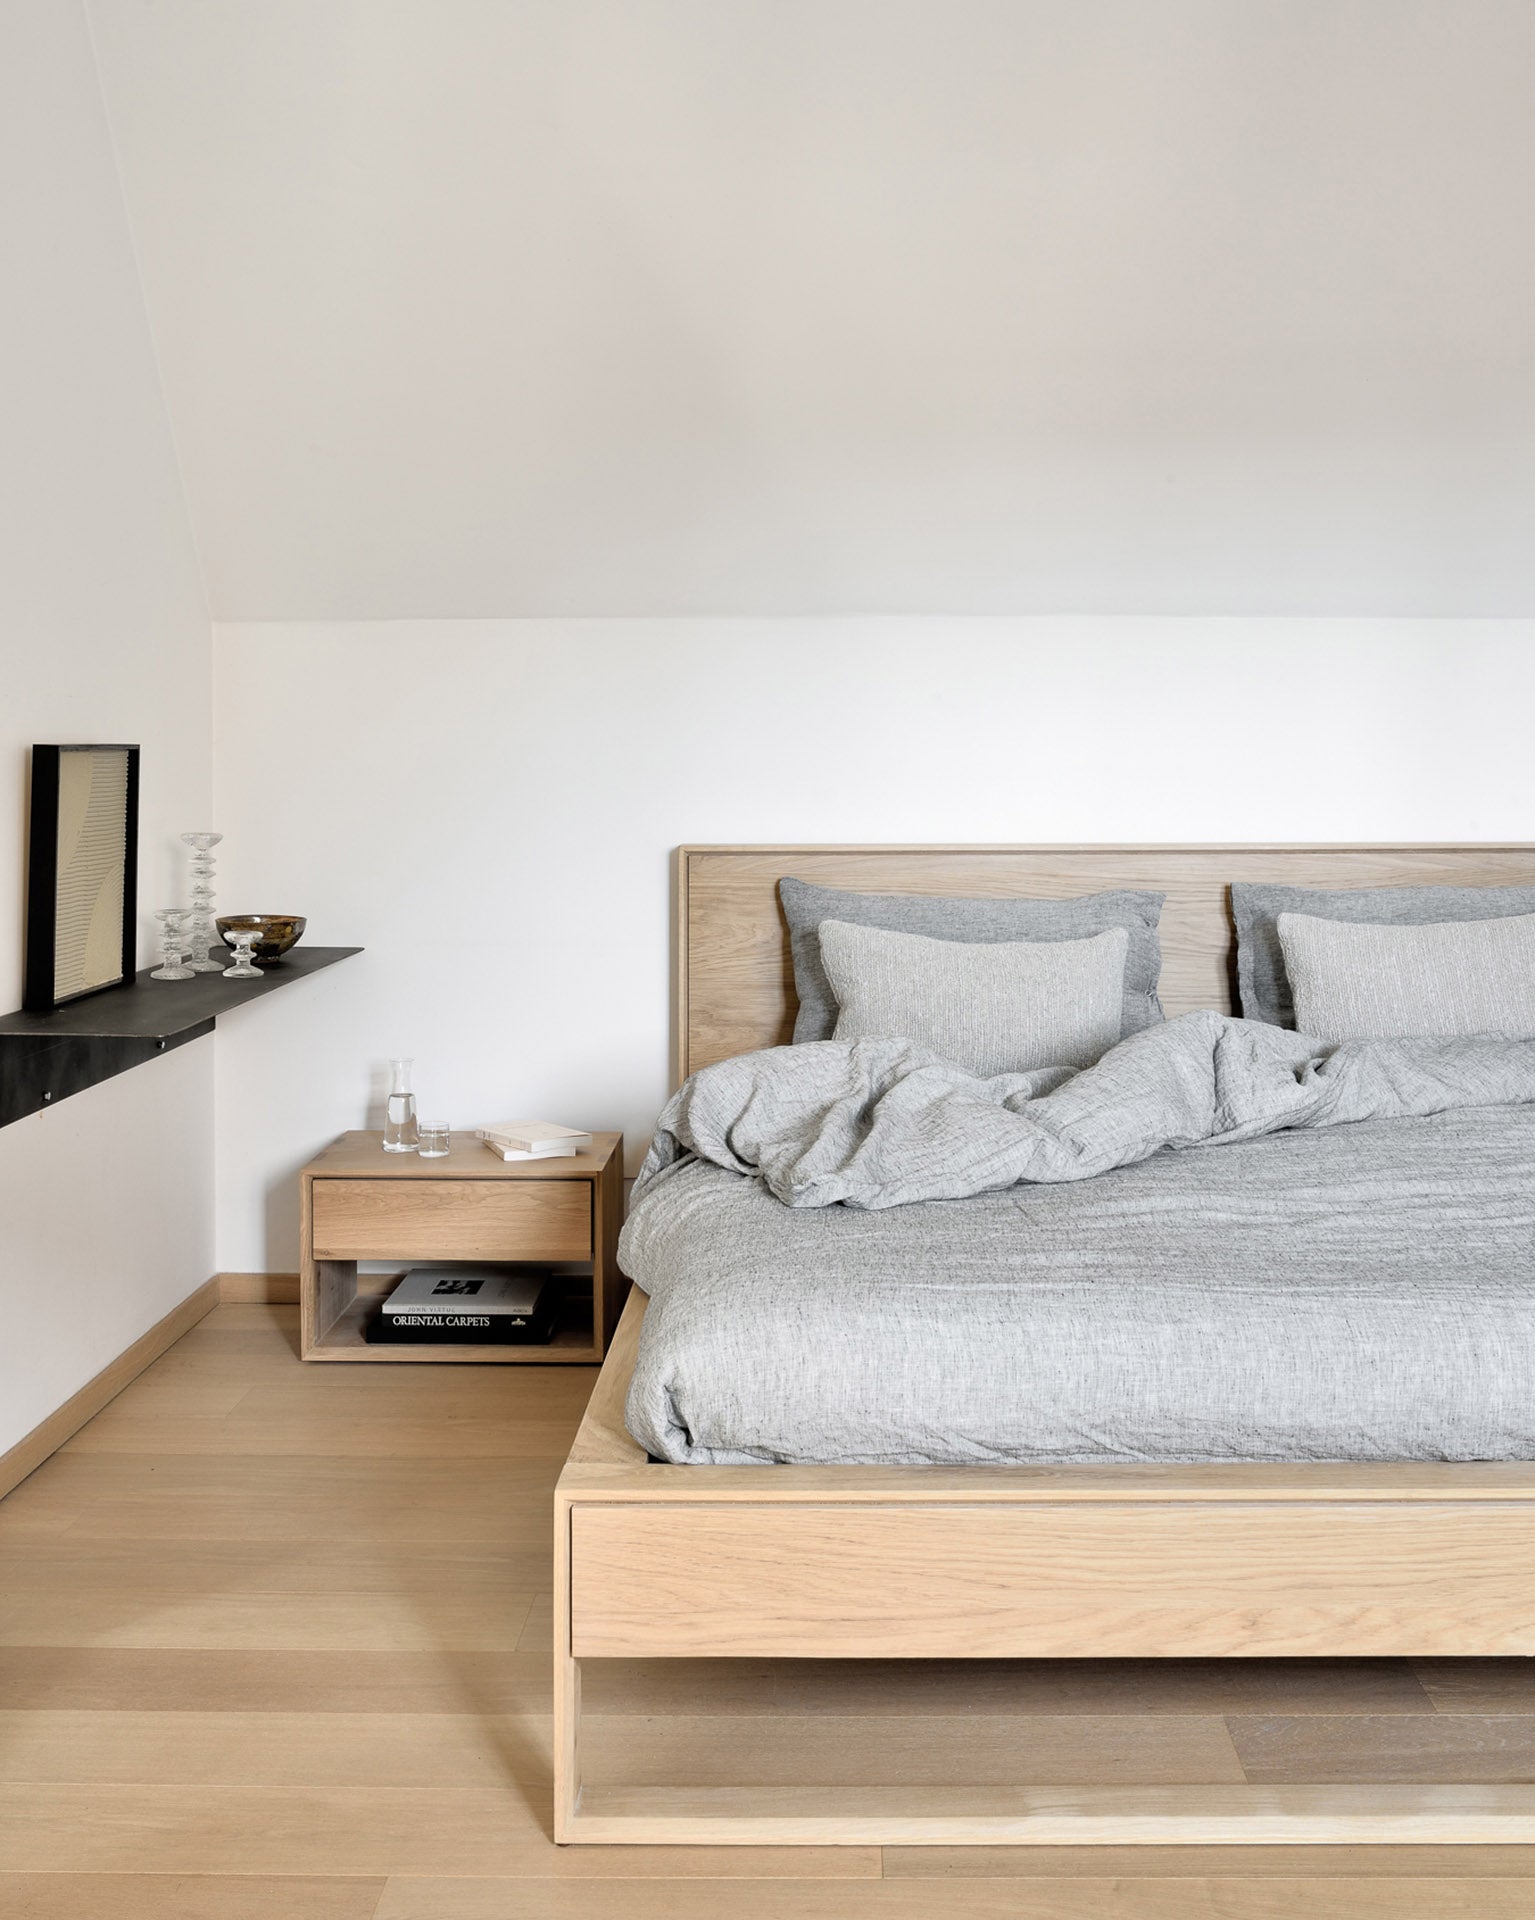 nordic Il bed by ethnicraft at adorn.house